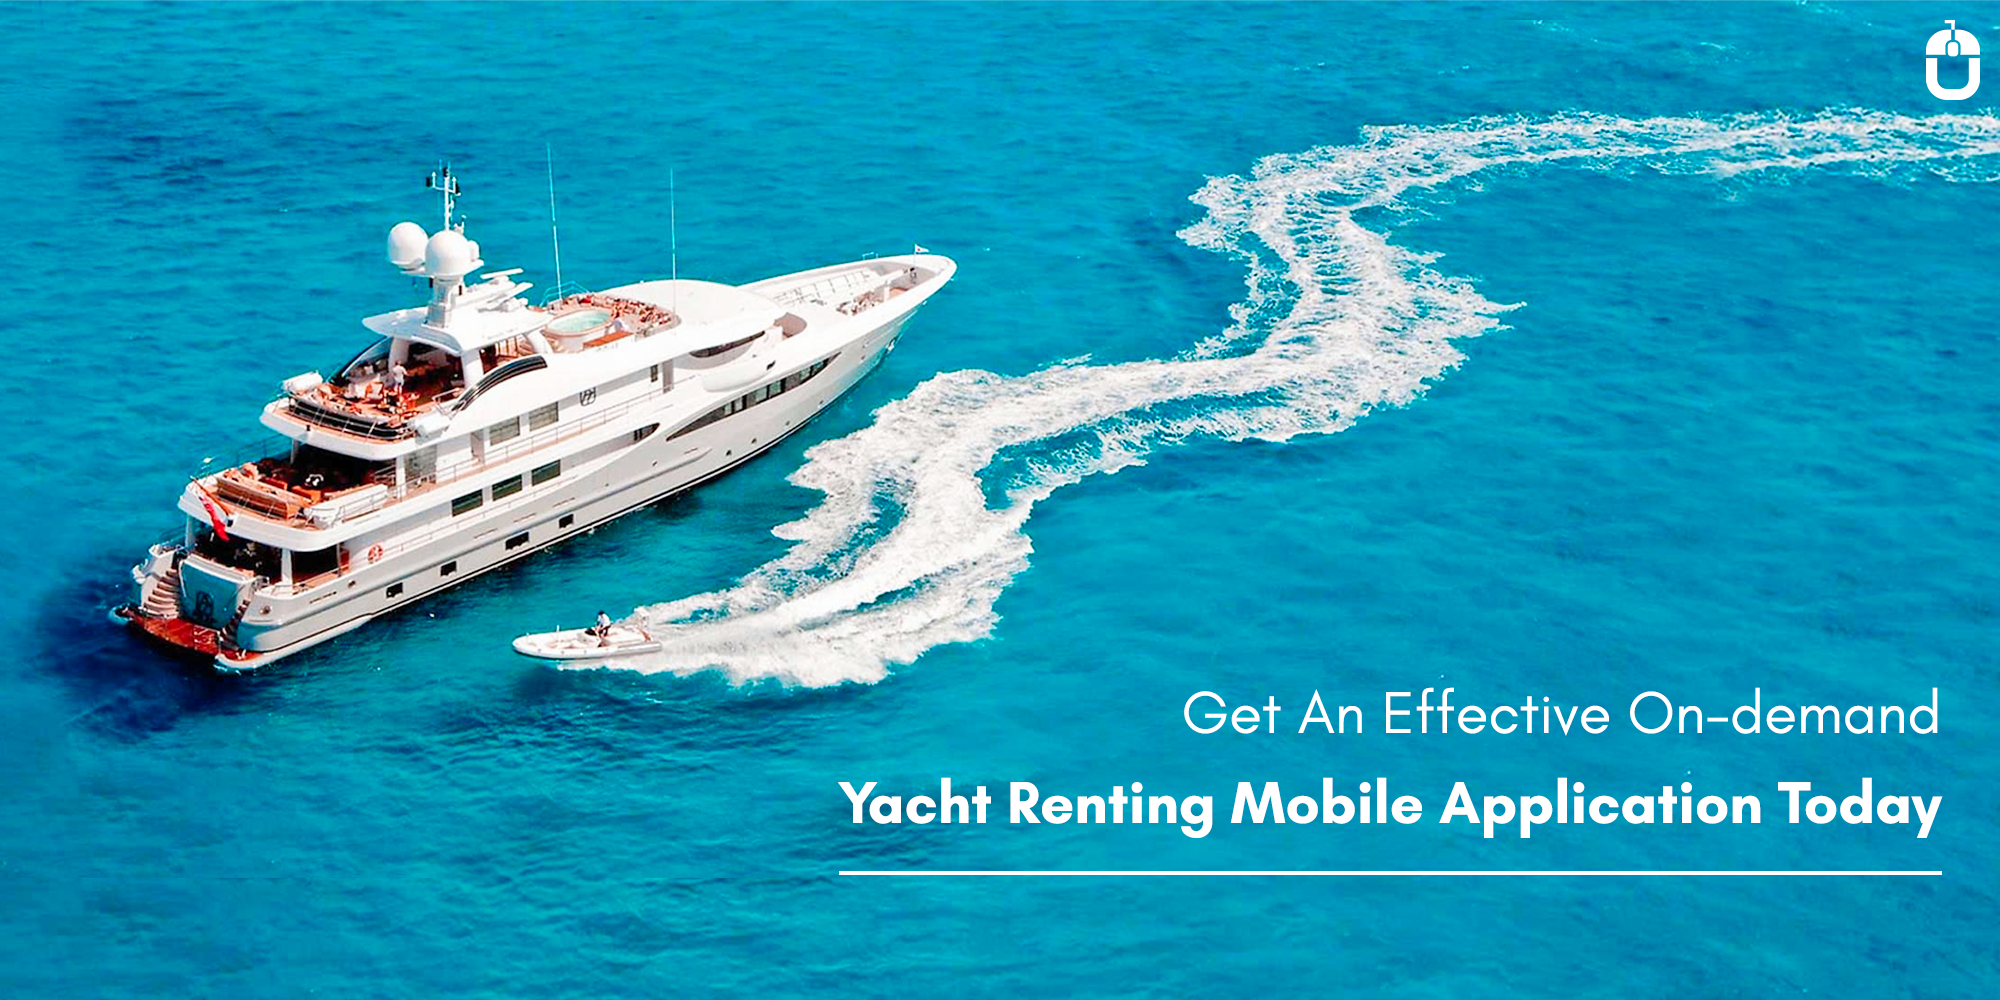 Get An Effective On-demand Yacht Renting Mobile Application Today